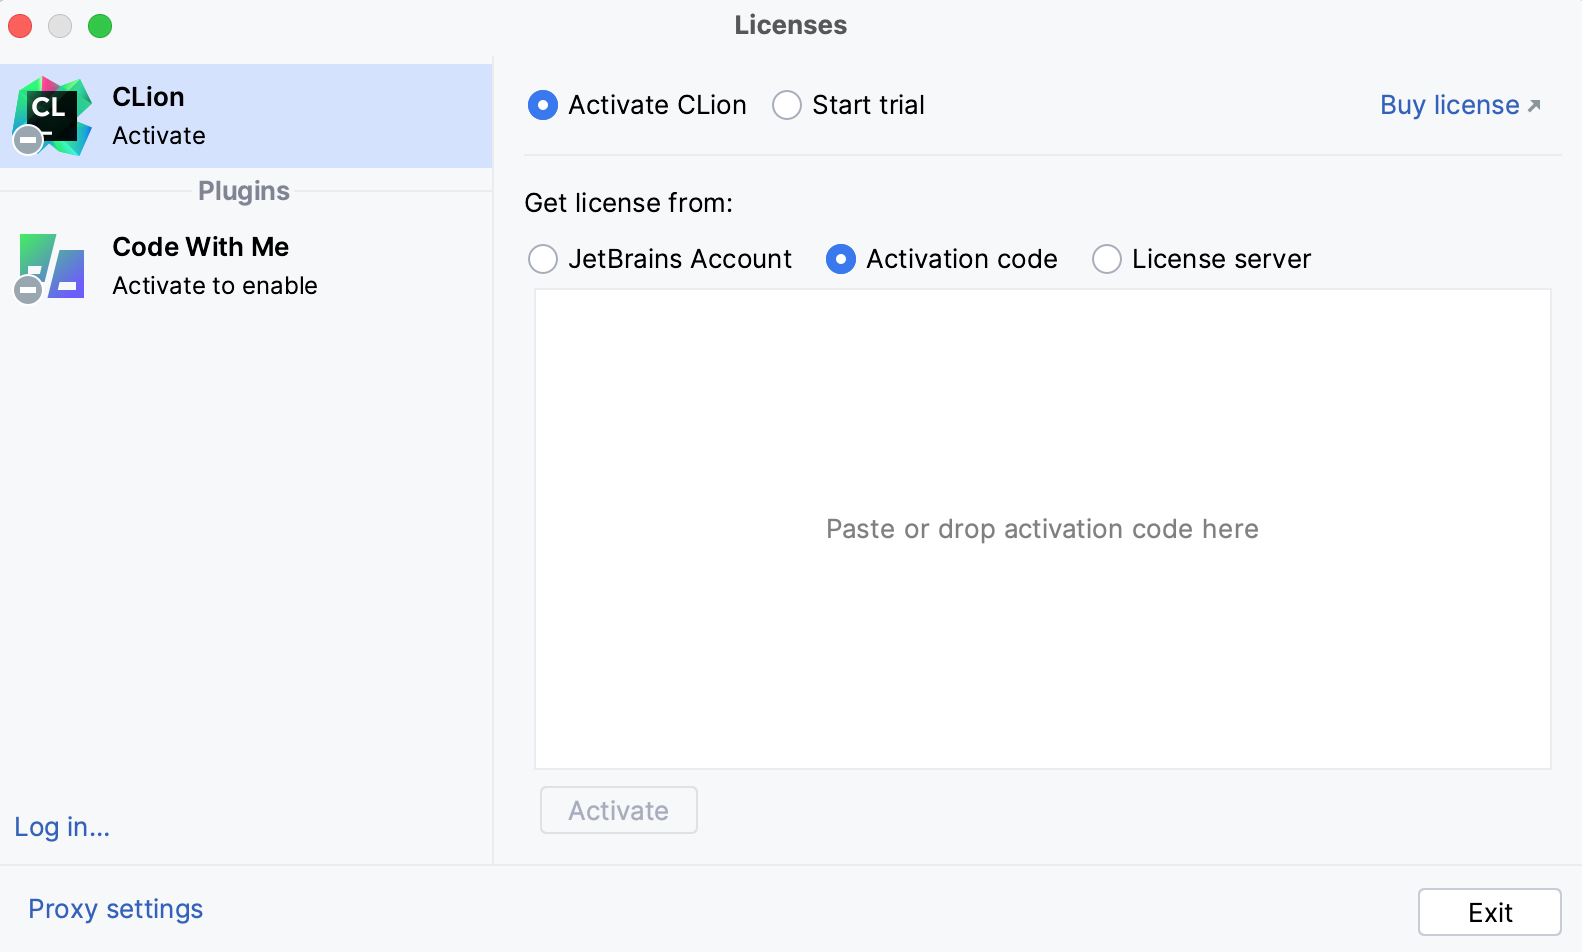 Activate CLion license with an activation code